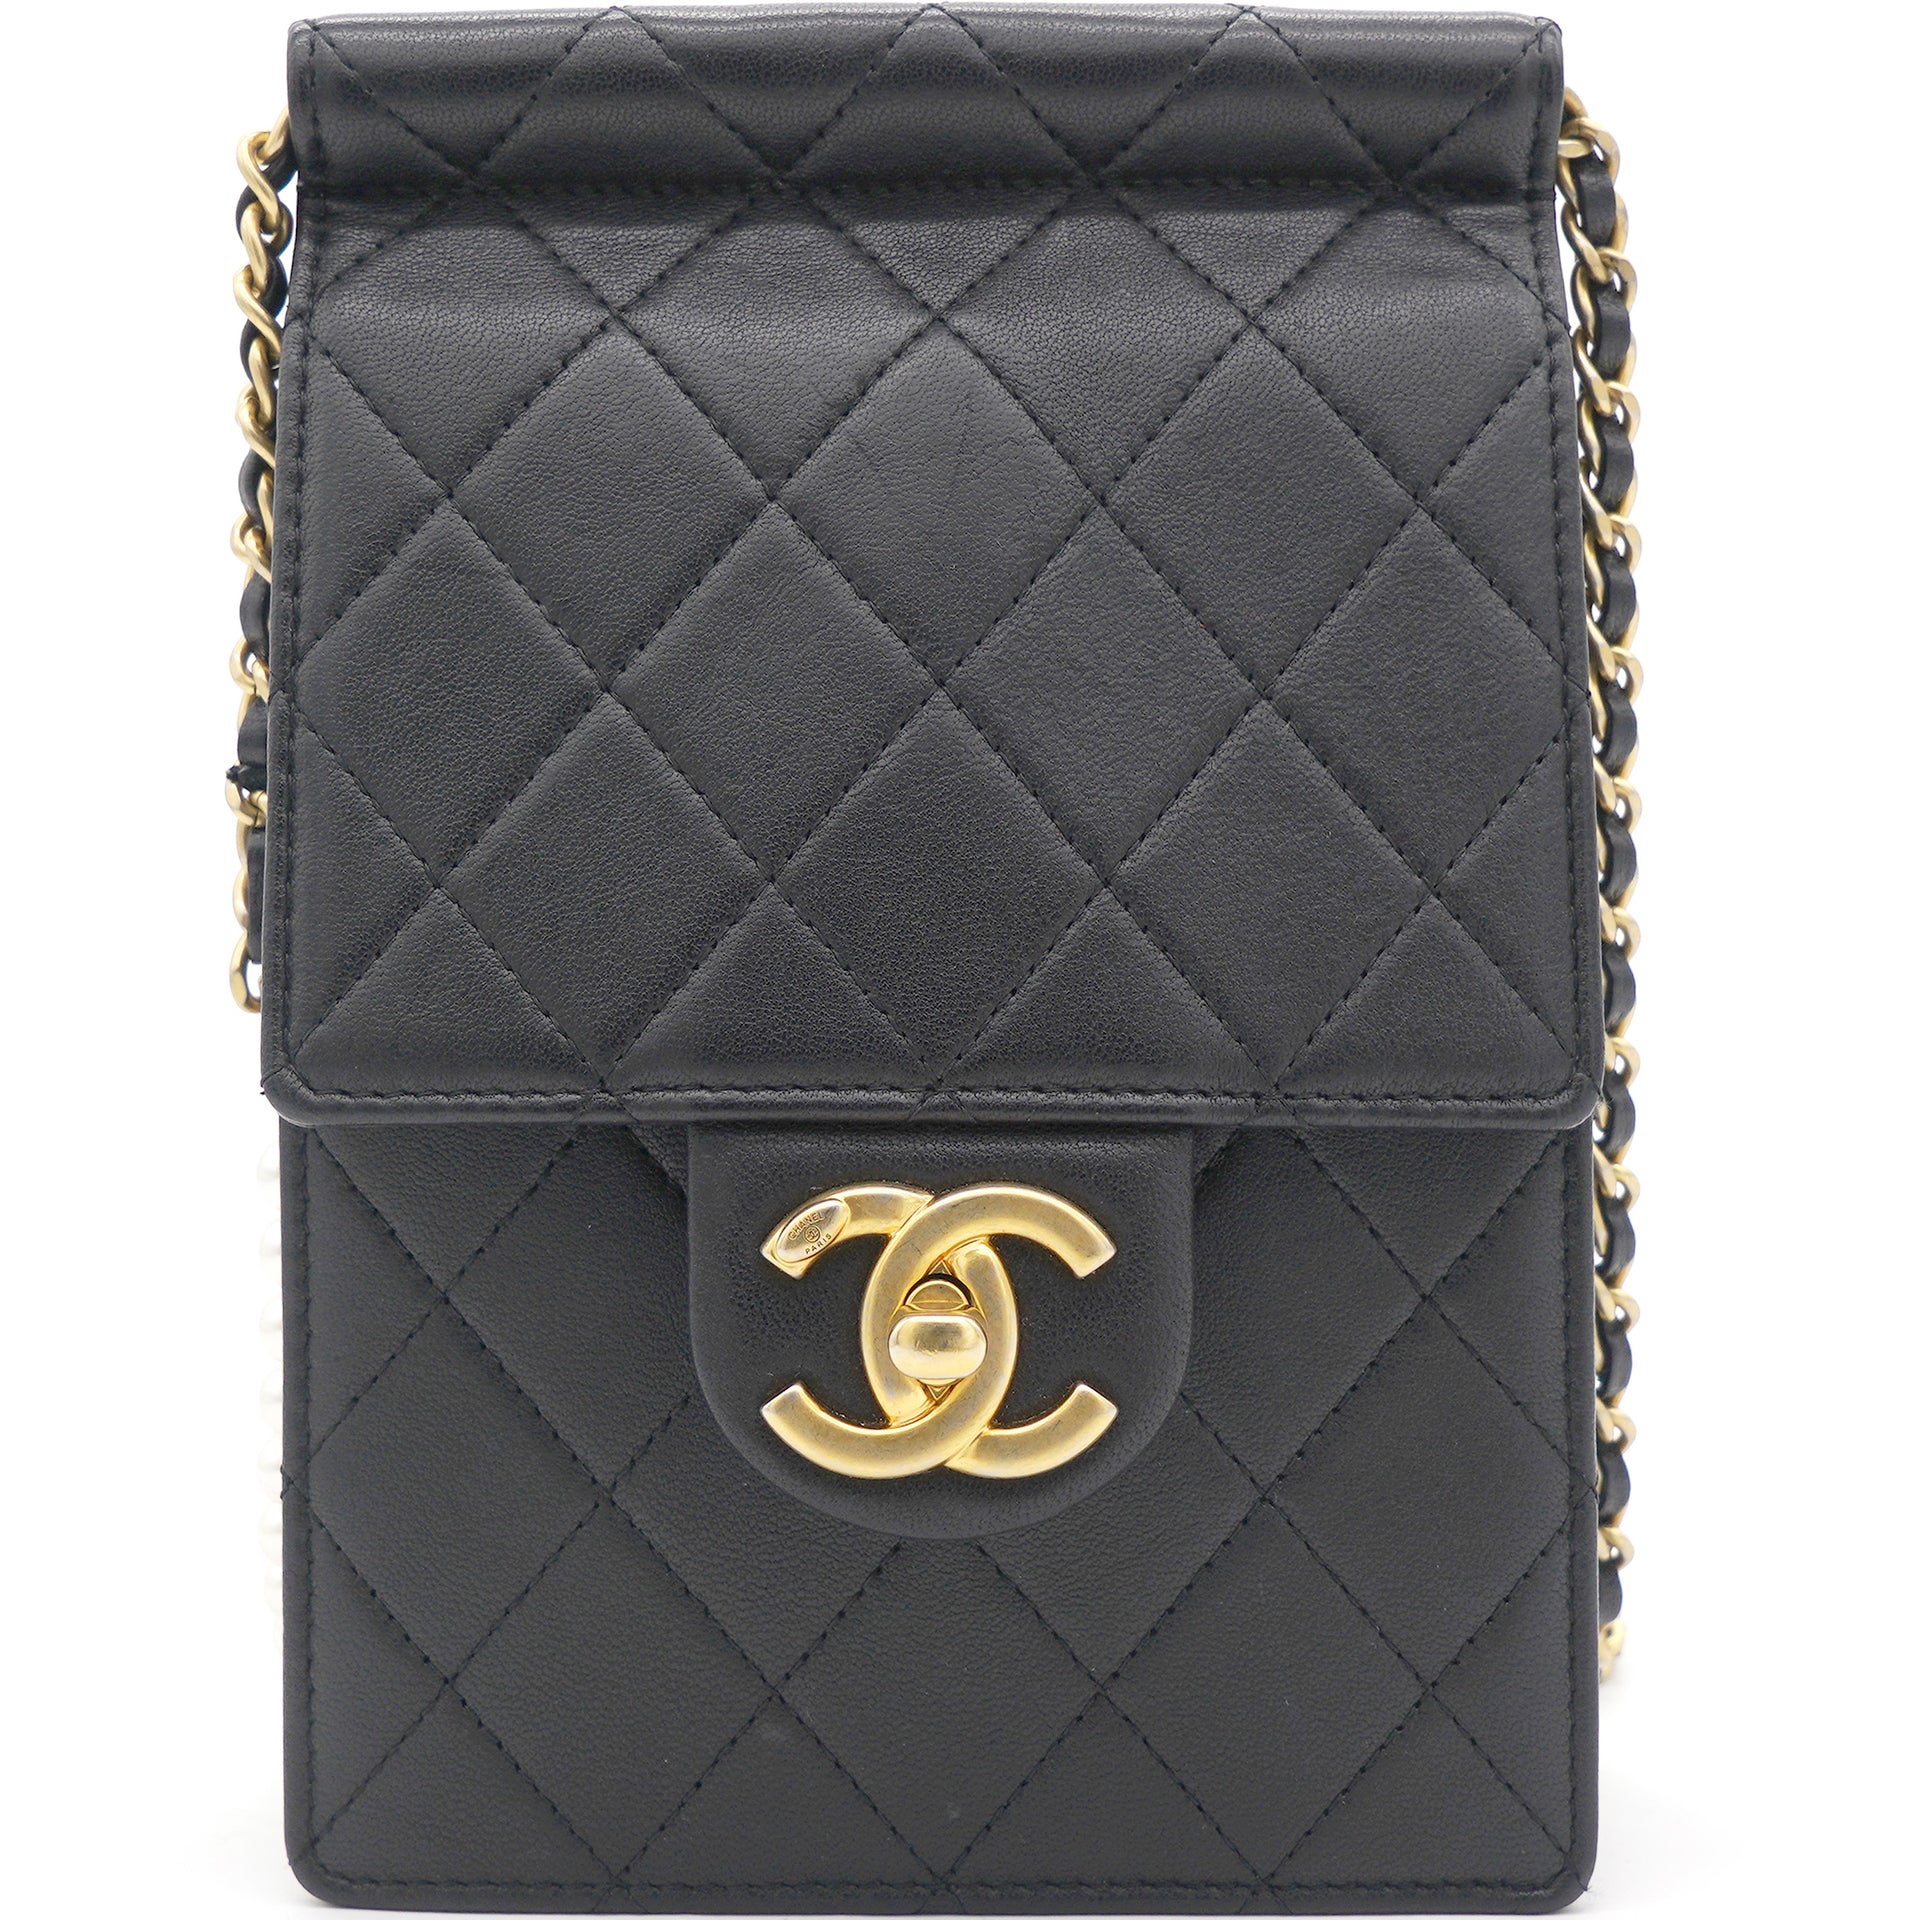 CHANEL CHANEL CC Mini Pearl Chain Wallet Shoulder Bag Lamb leather Black  Used Women Product Code2104102128490BRAND OFF Online Store